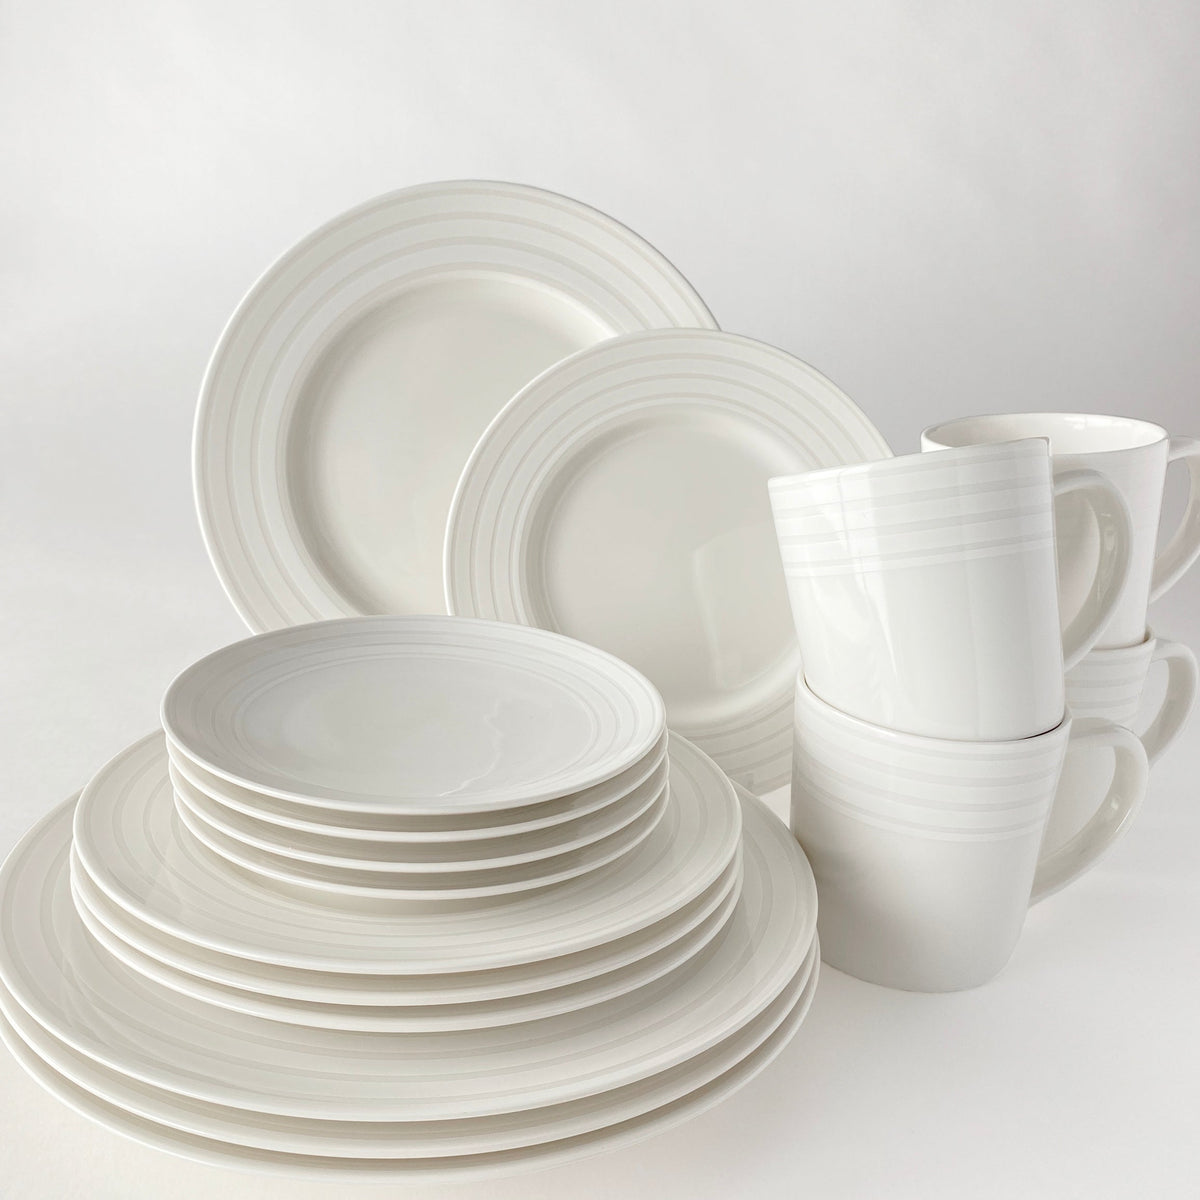 A Caskata Artisanal Home Cambridge Stripe White Rimmed Dinner Plate set with cups and saucers.